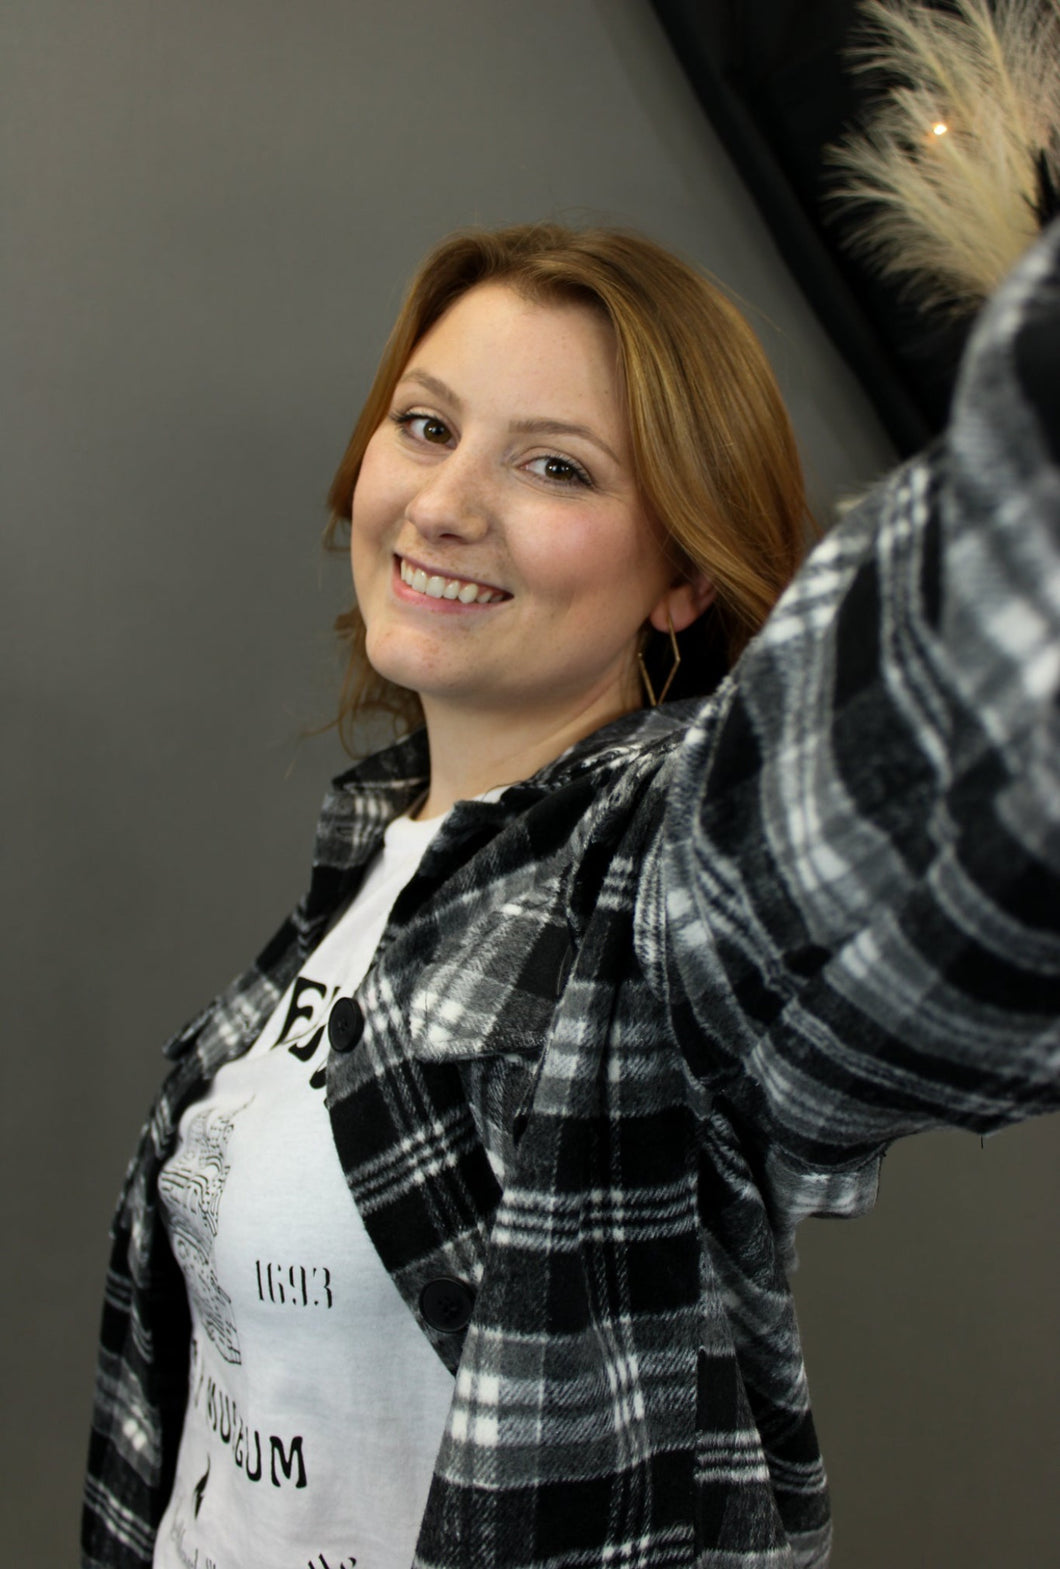 Model is wearing a black and white plaid shacket.